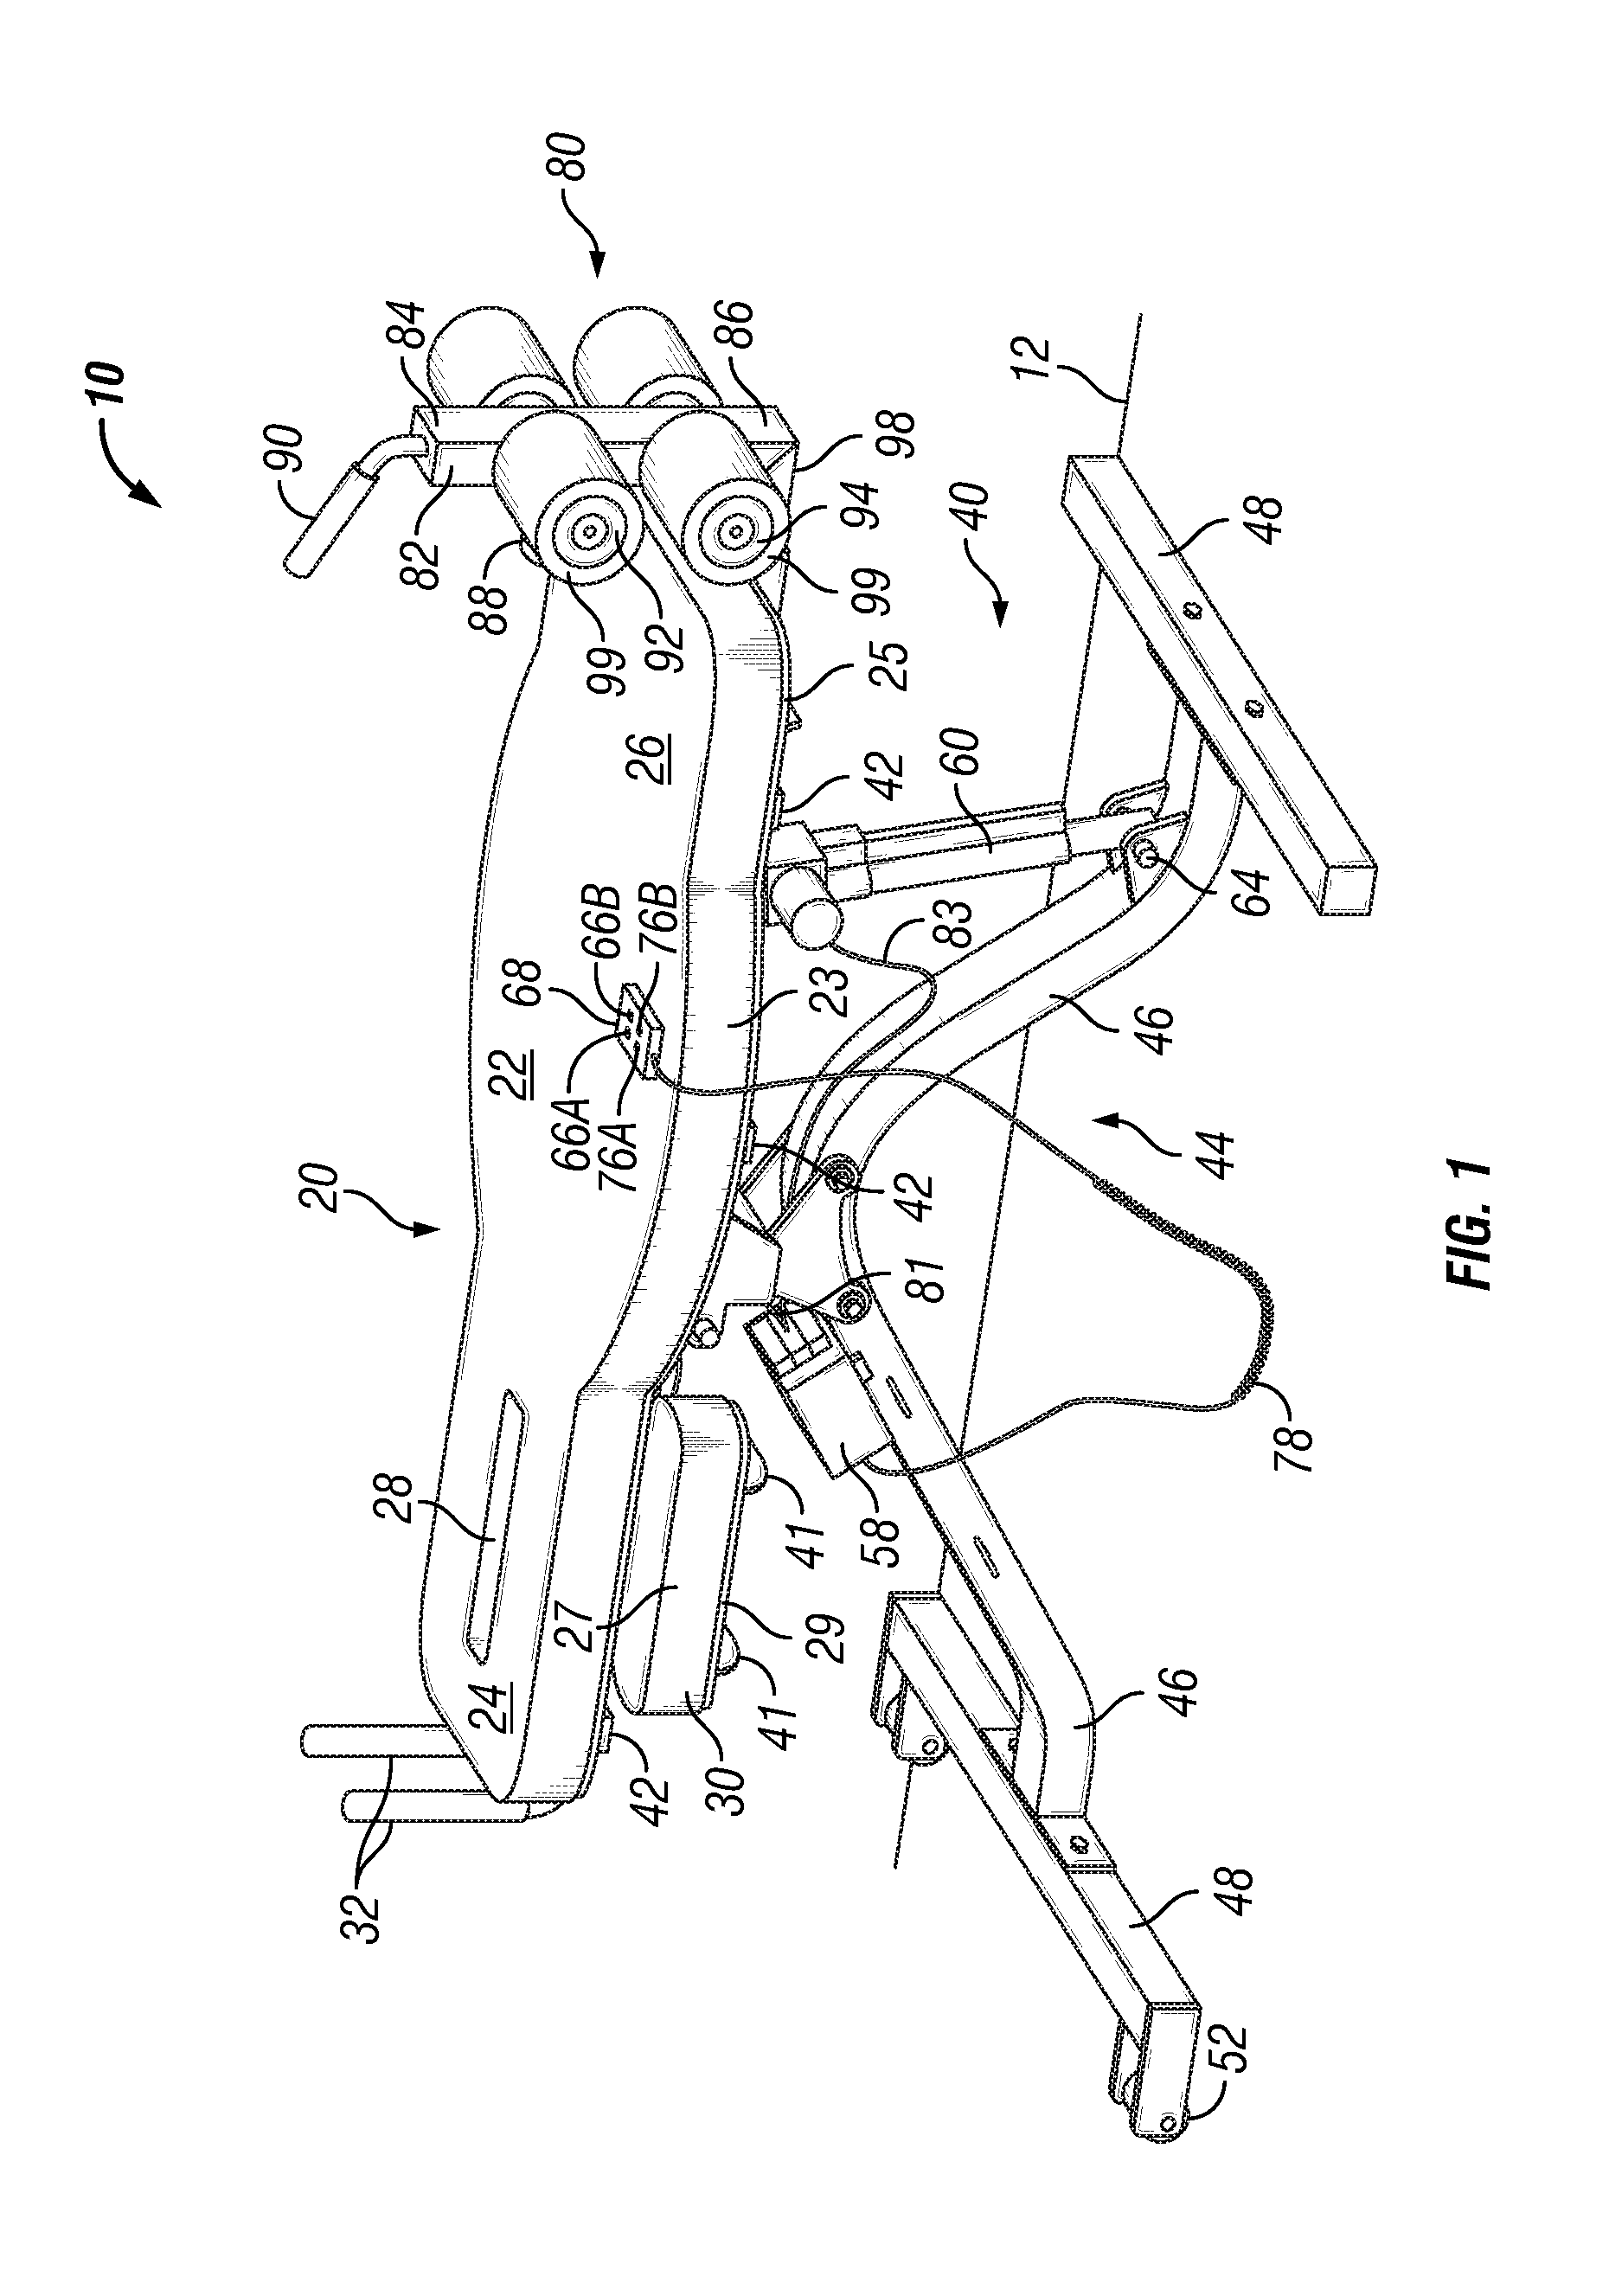 Apparatus and method of gravity-assisted spinal stretching